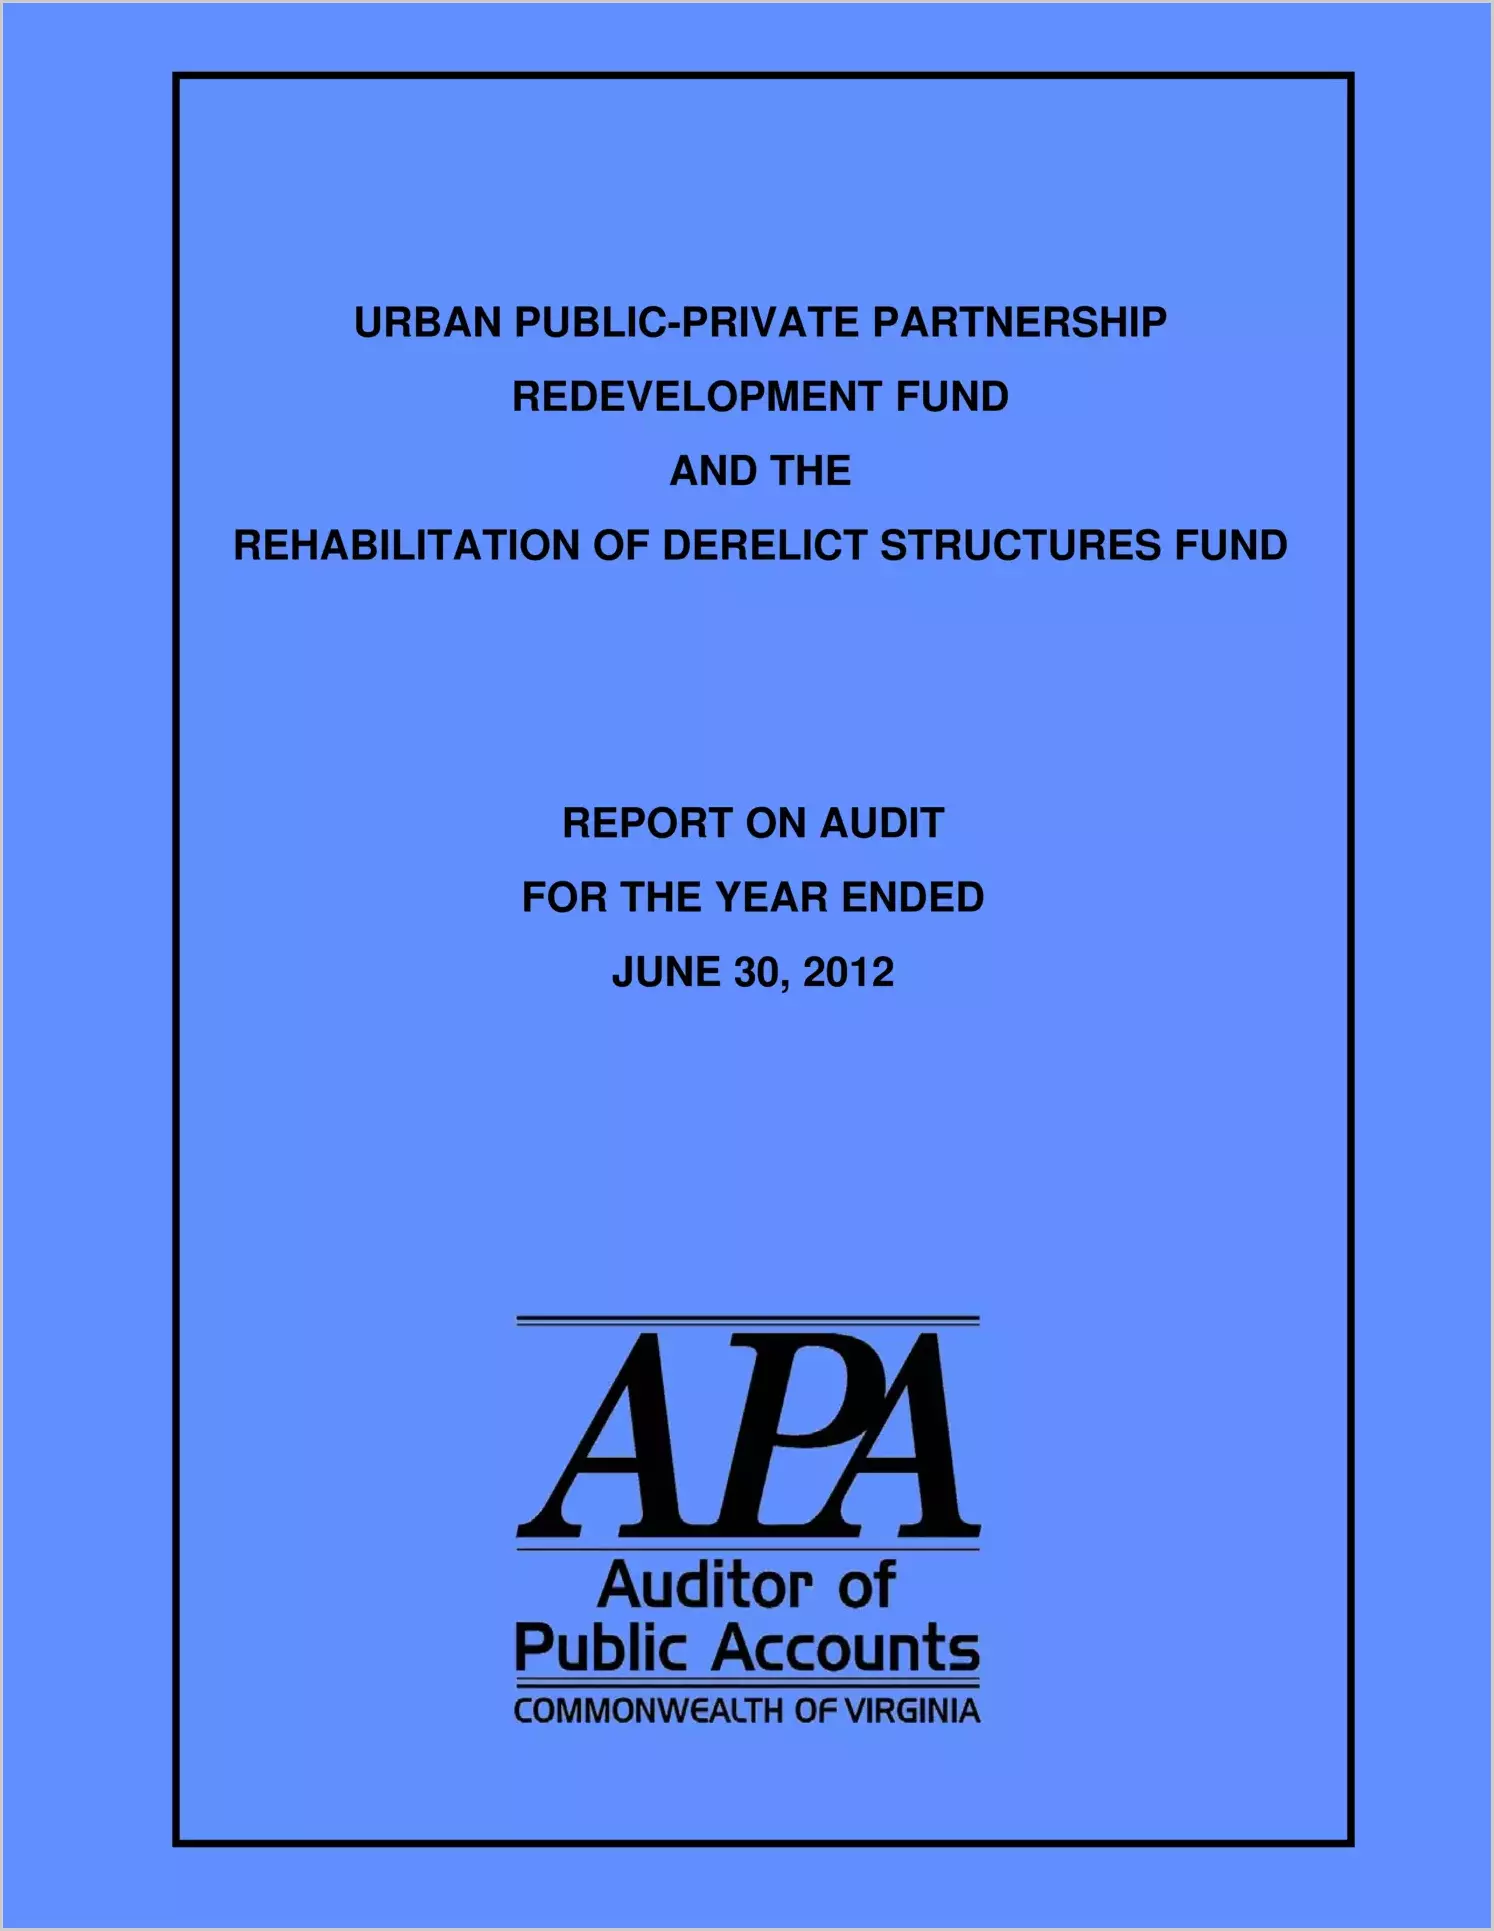 Urban Public-Private Partnership Redevelopment Fund and the Rehabilitation of Derelict Structures Fund for the fiscal year ended June 30, 2012